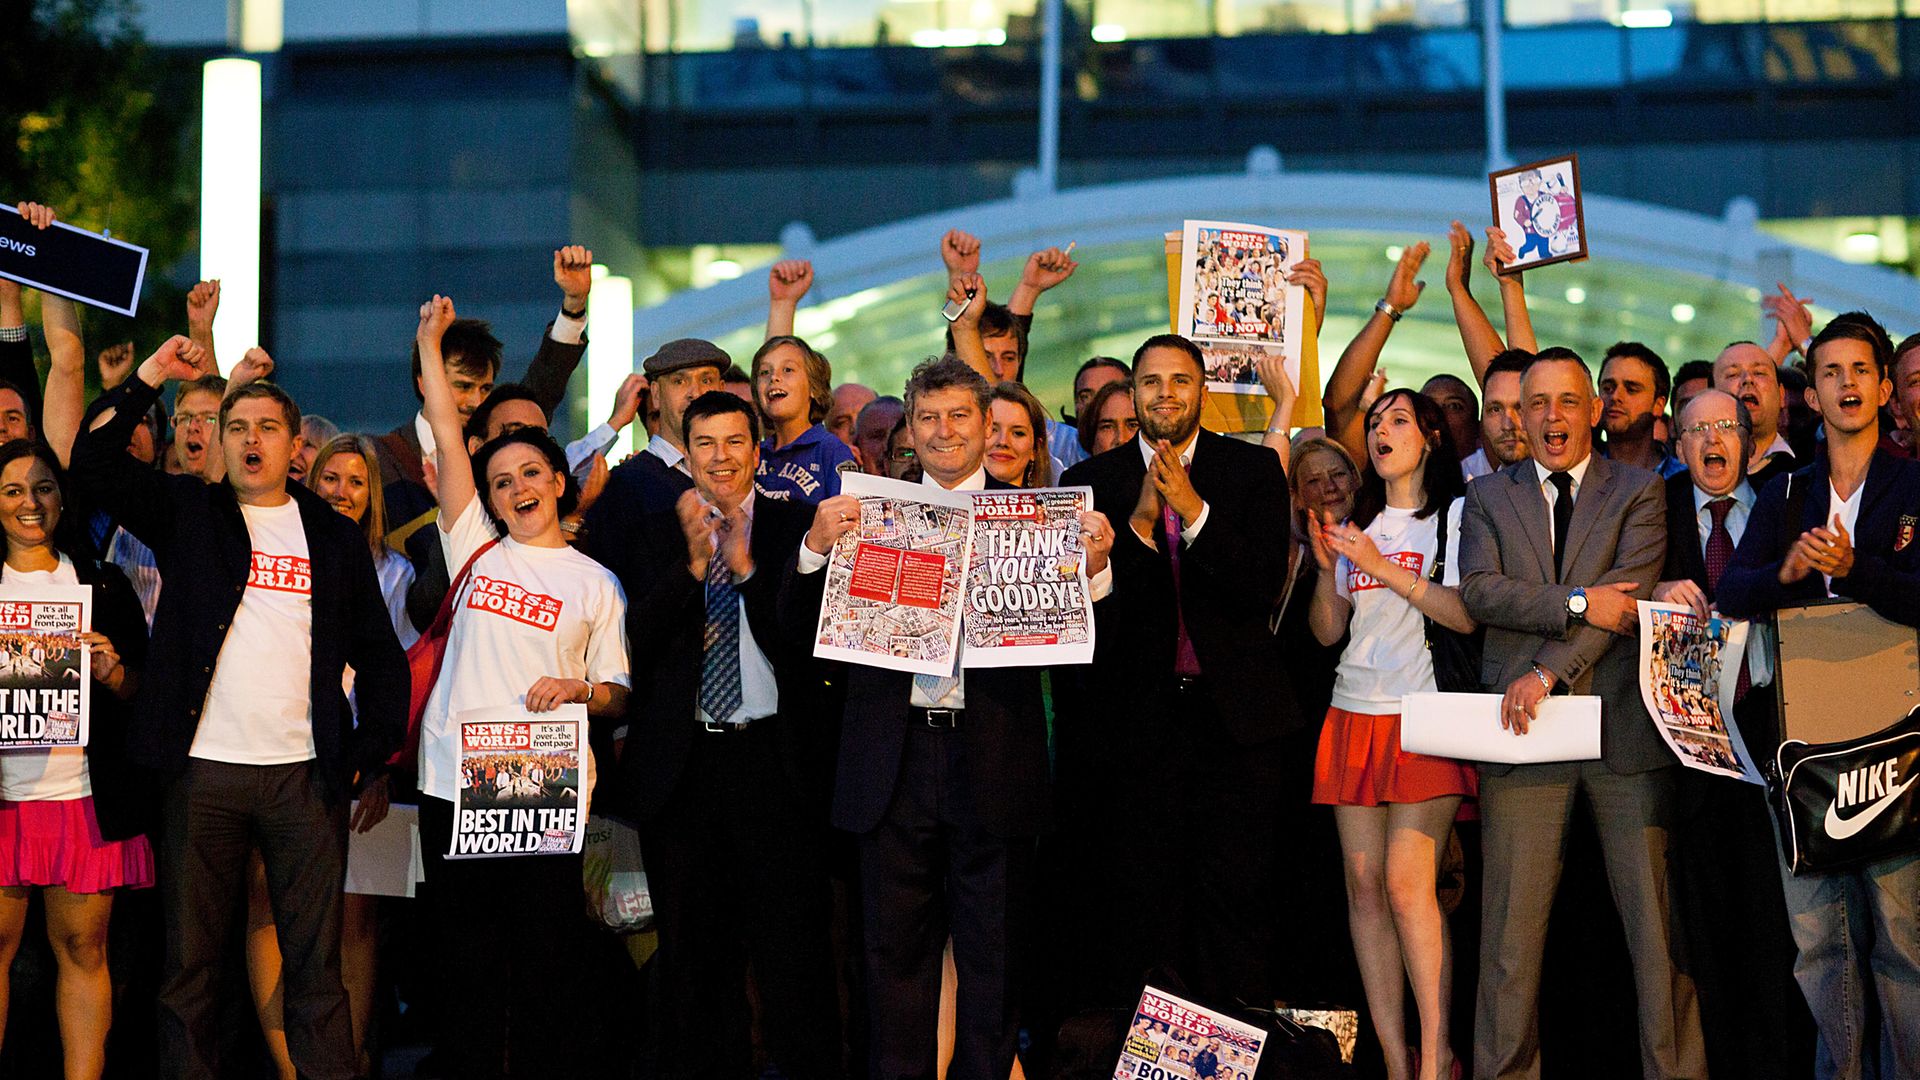 Staff of the News of the World Editor, with editor Colin Myler in the centre, hold up copies of the last ever edition of the paper, in July 2011 - Credit: Getty Images